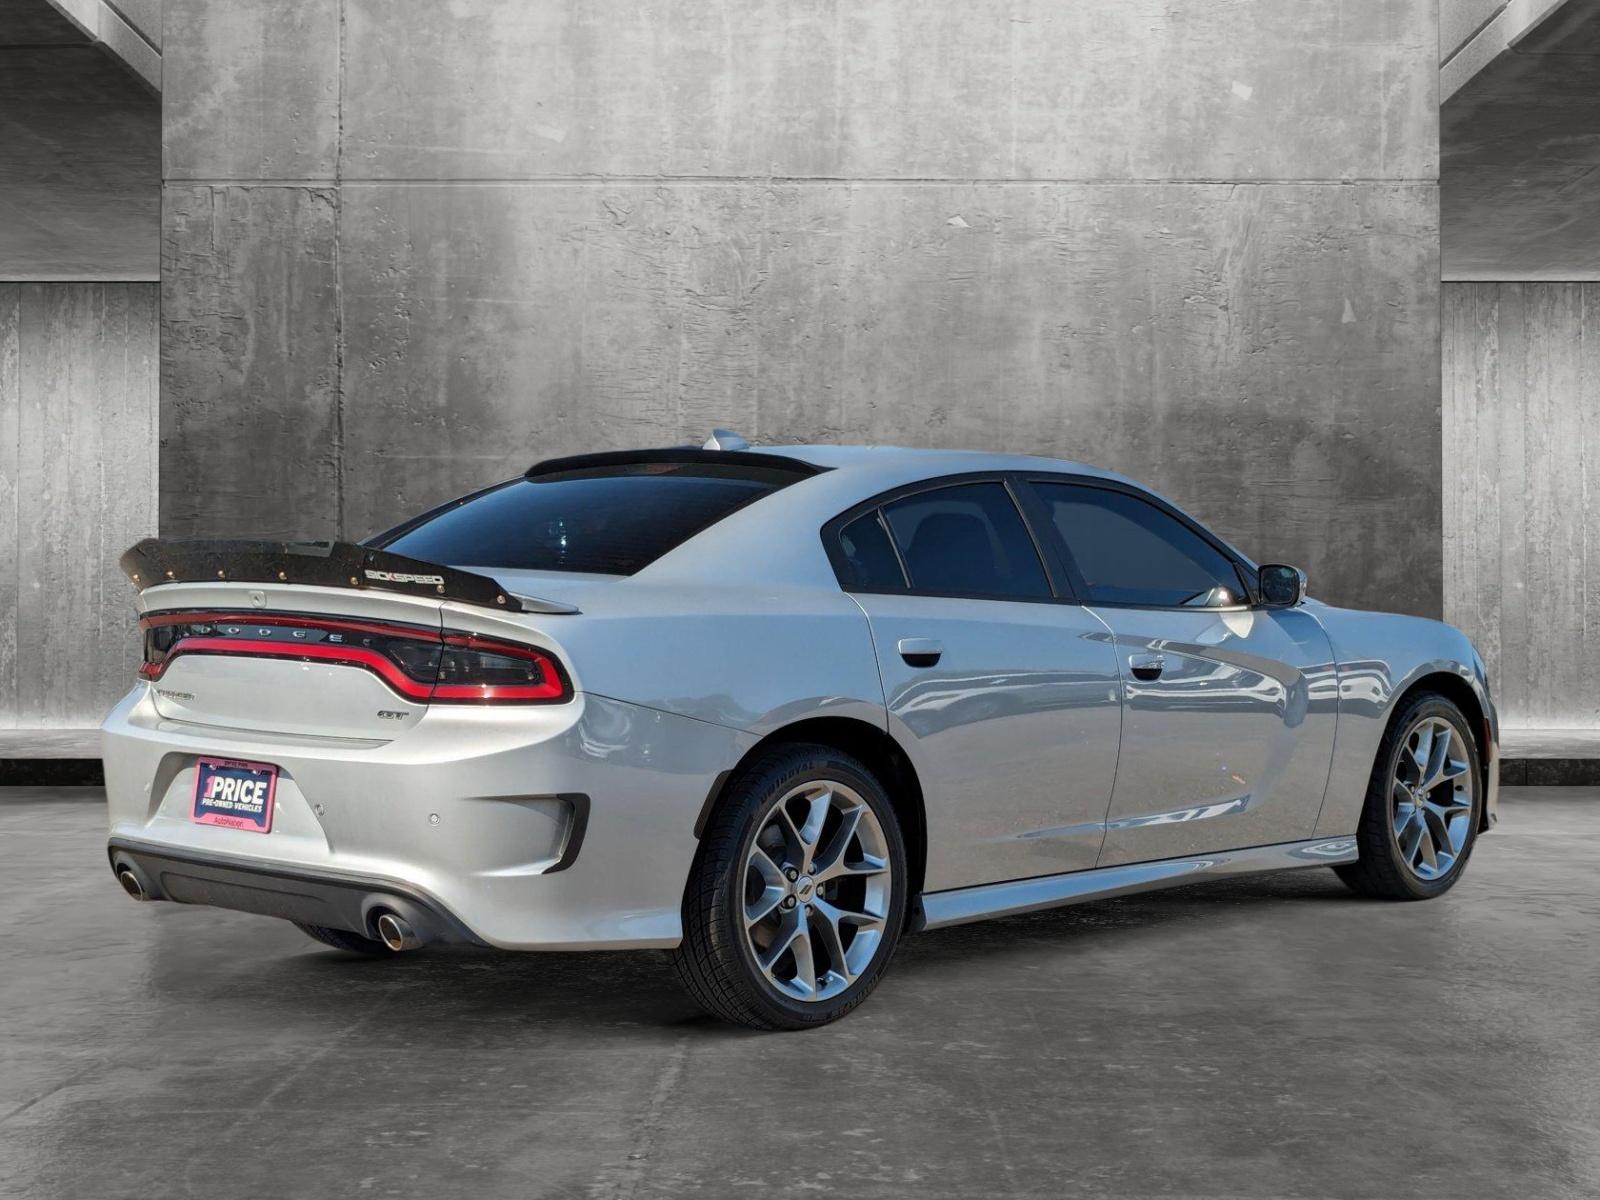 2021 Dodge Charger Vehicle Photo in St. Petersburg, FL 33713